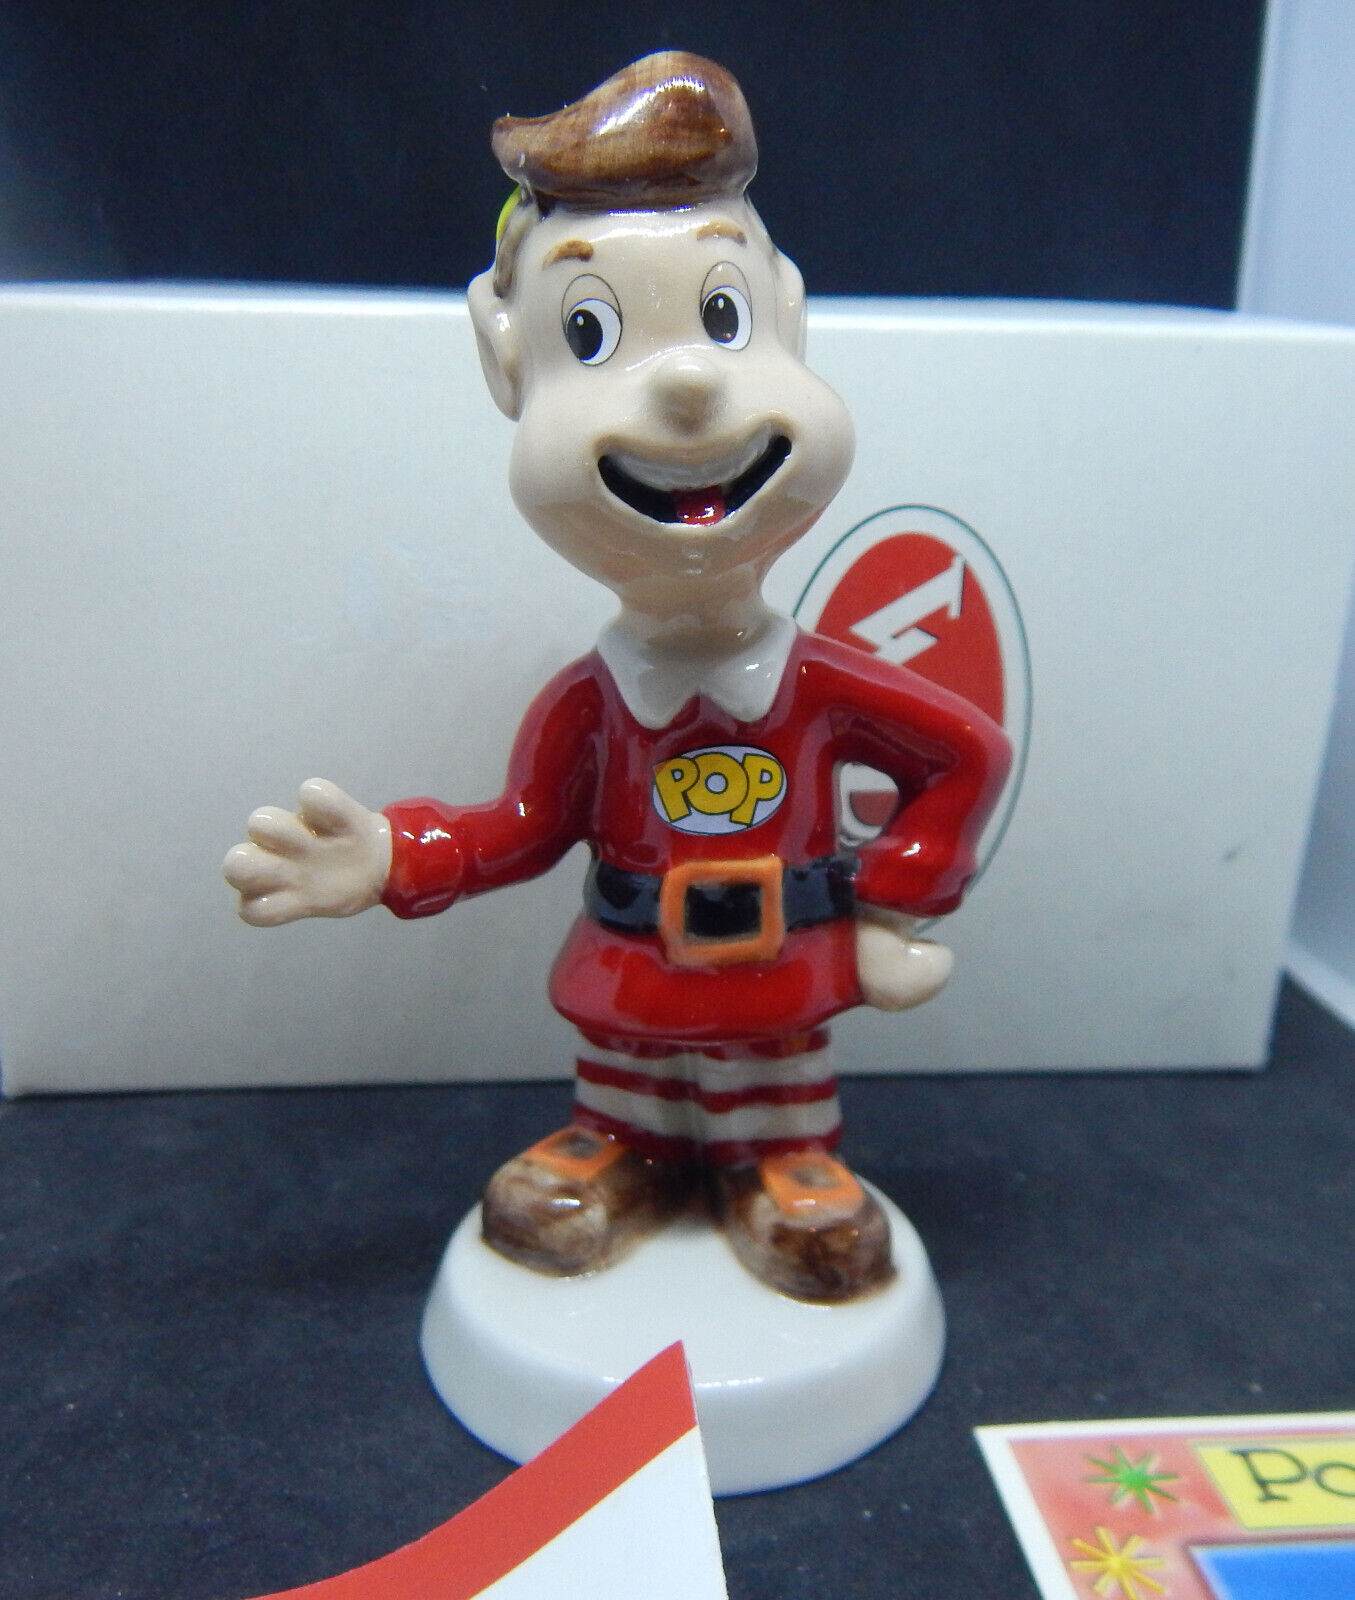 2004 Retired Wade POP Kellogg Cereal Co. Lmt. Ed. Collectors Club Figurine